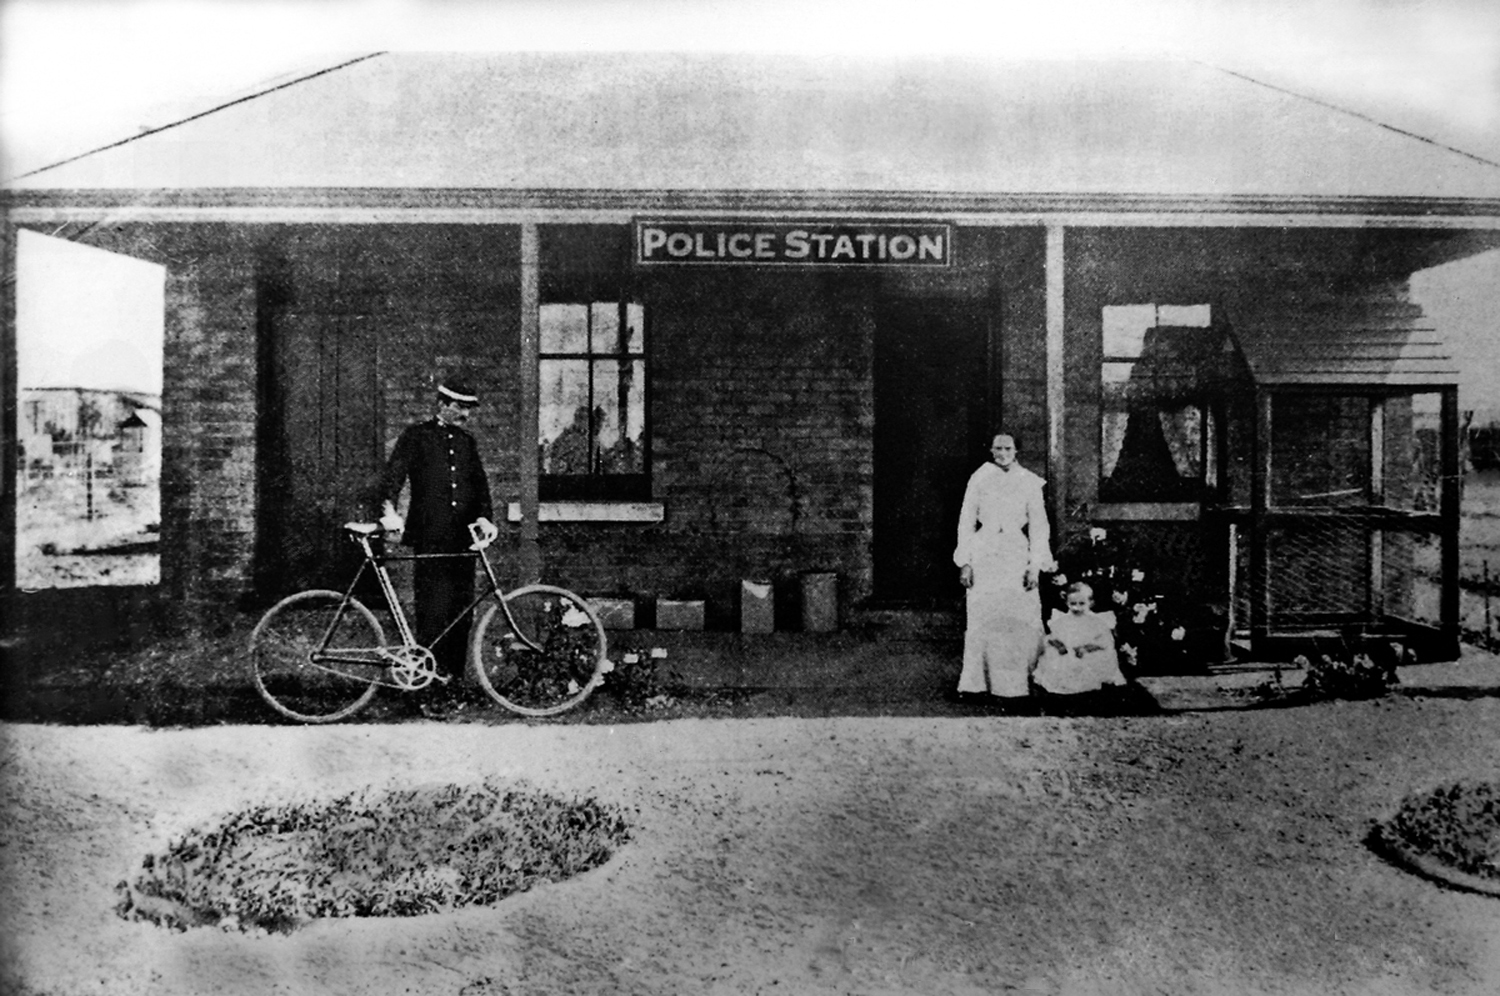 The Piccadilly Police Station Hare Street, Piccadilly